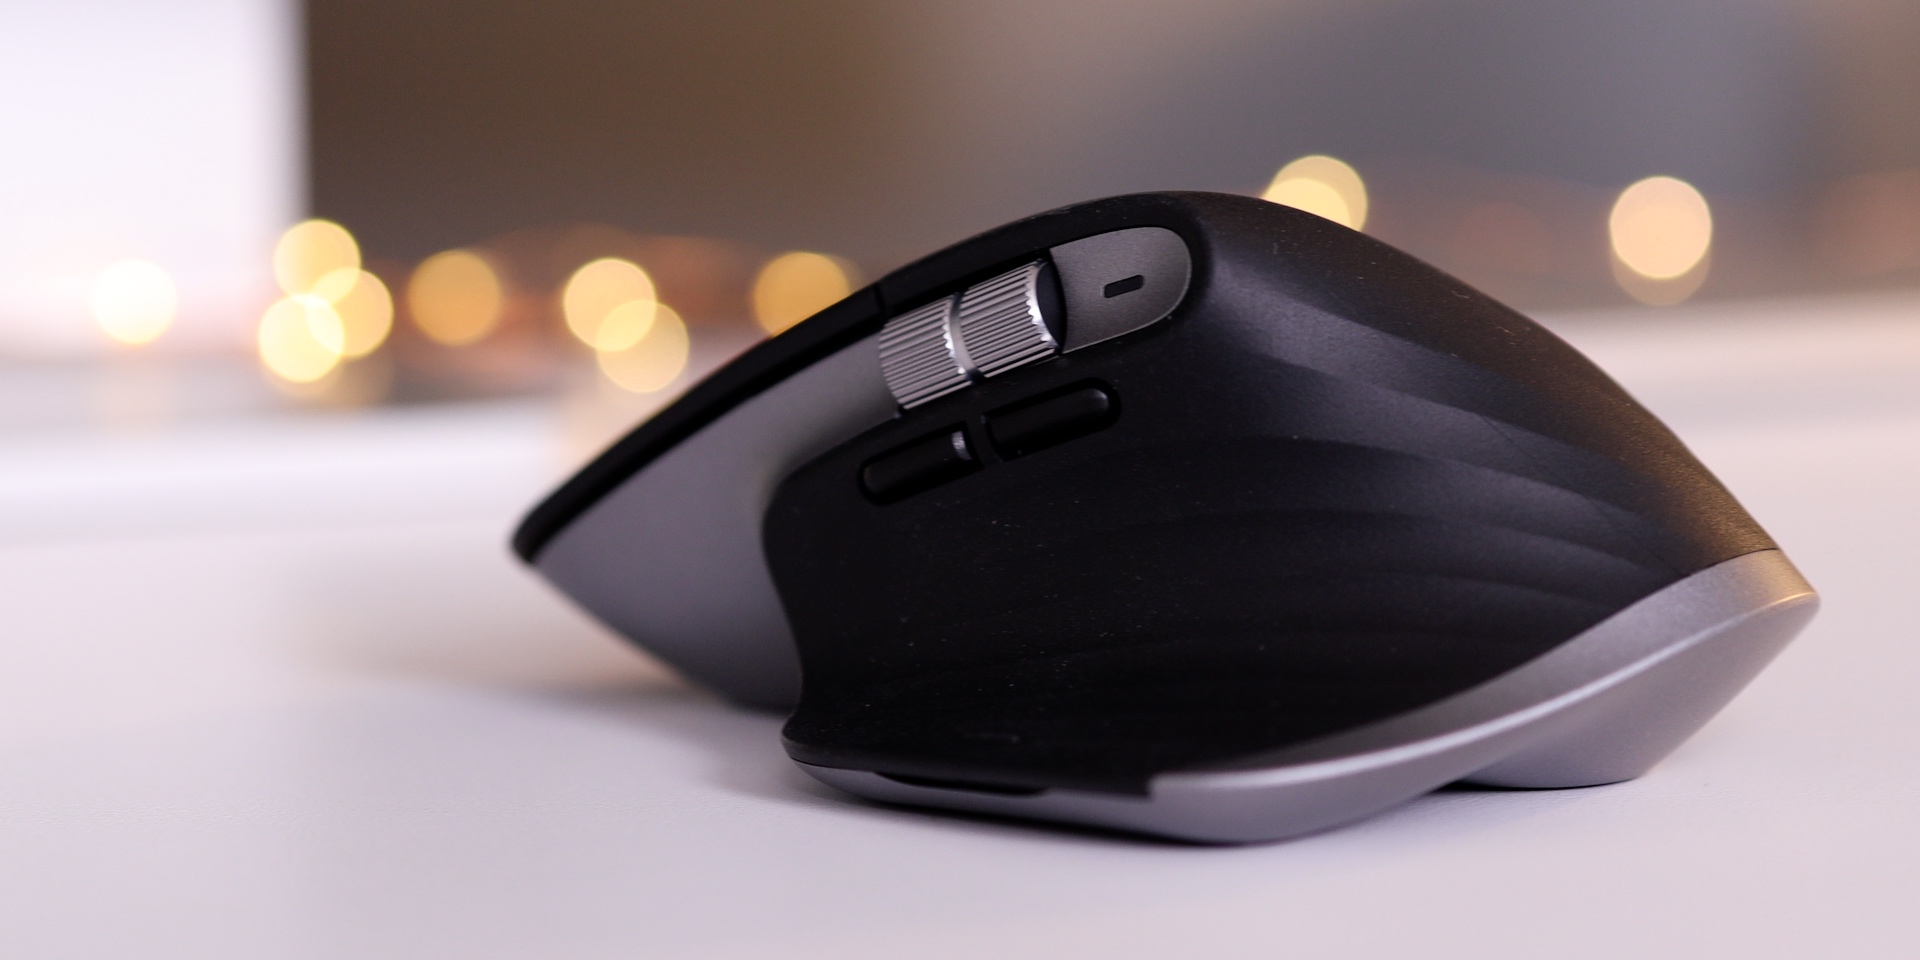 Logitech's popular MX Master 3 Advanced Mouse for Mac hits best price